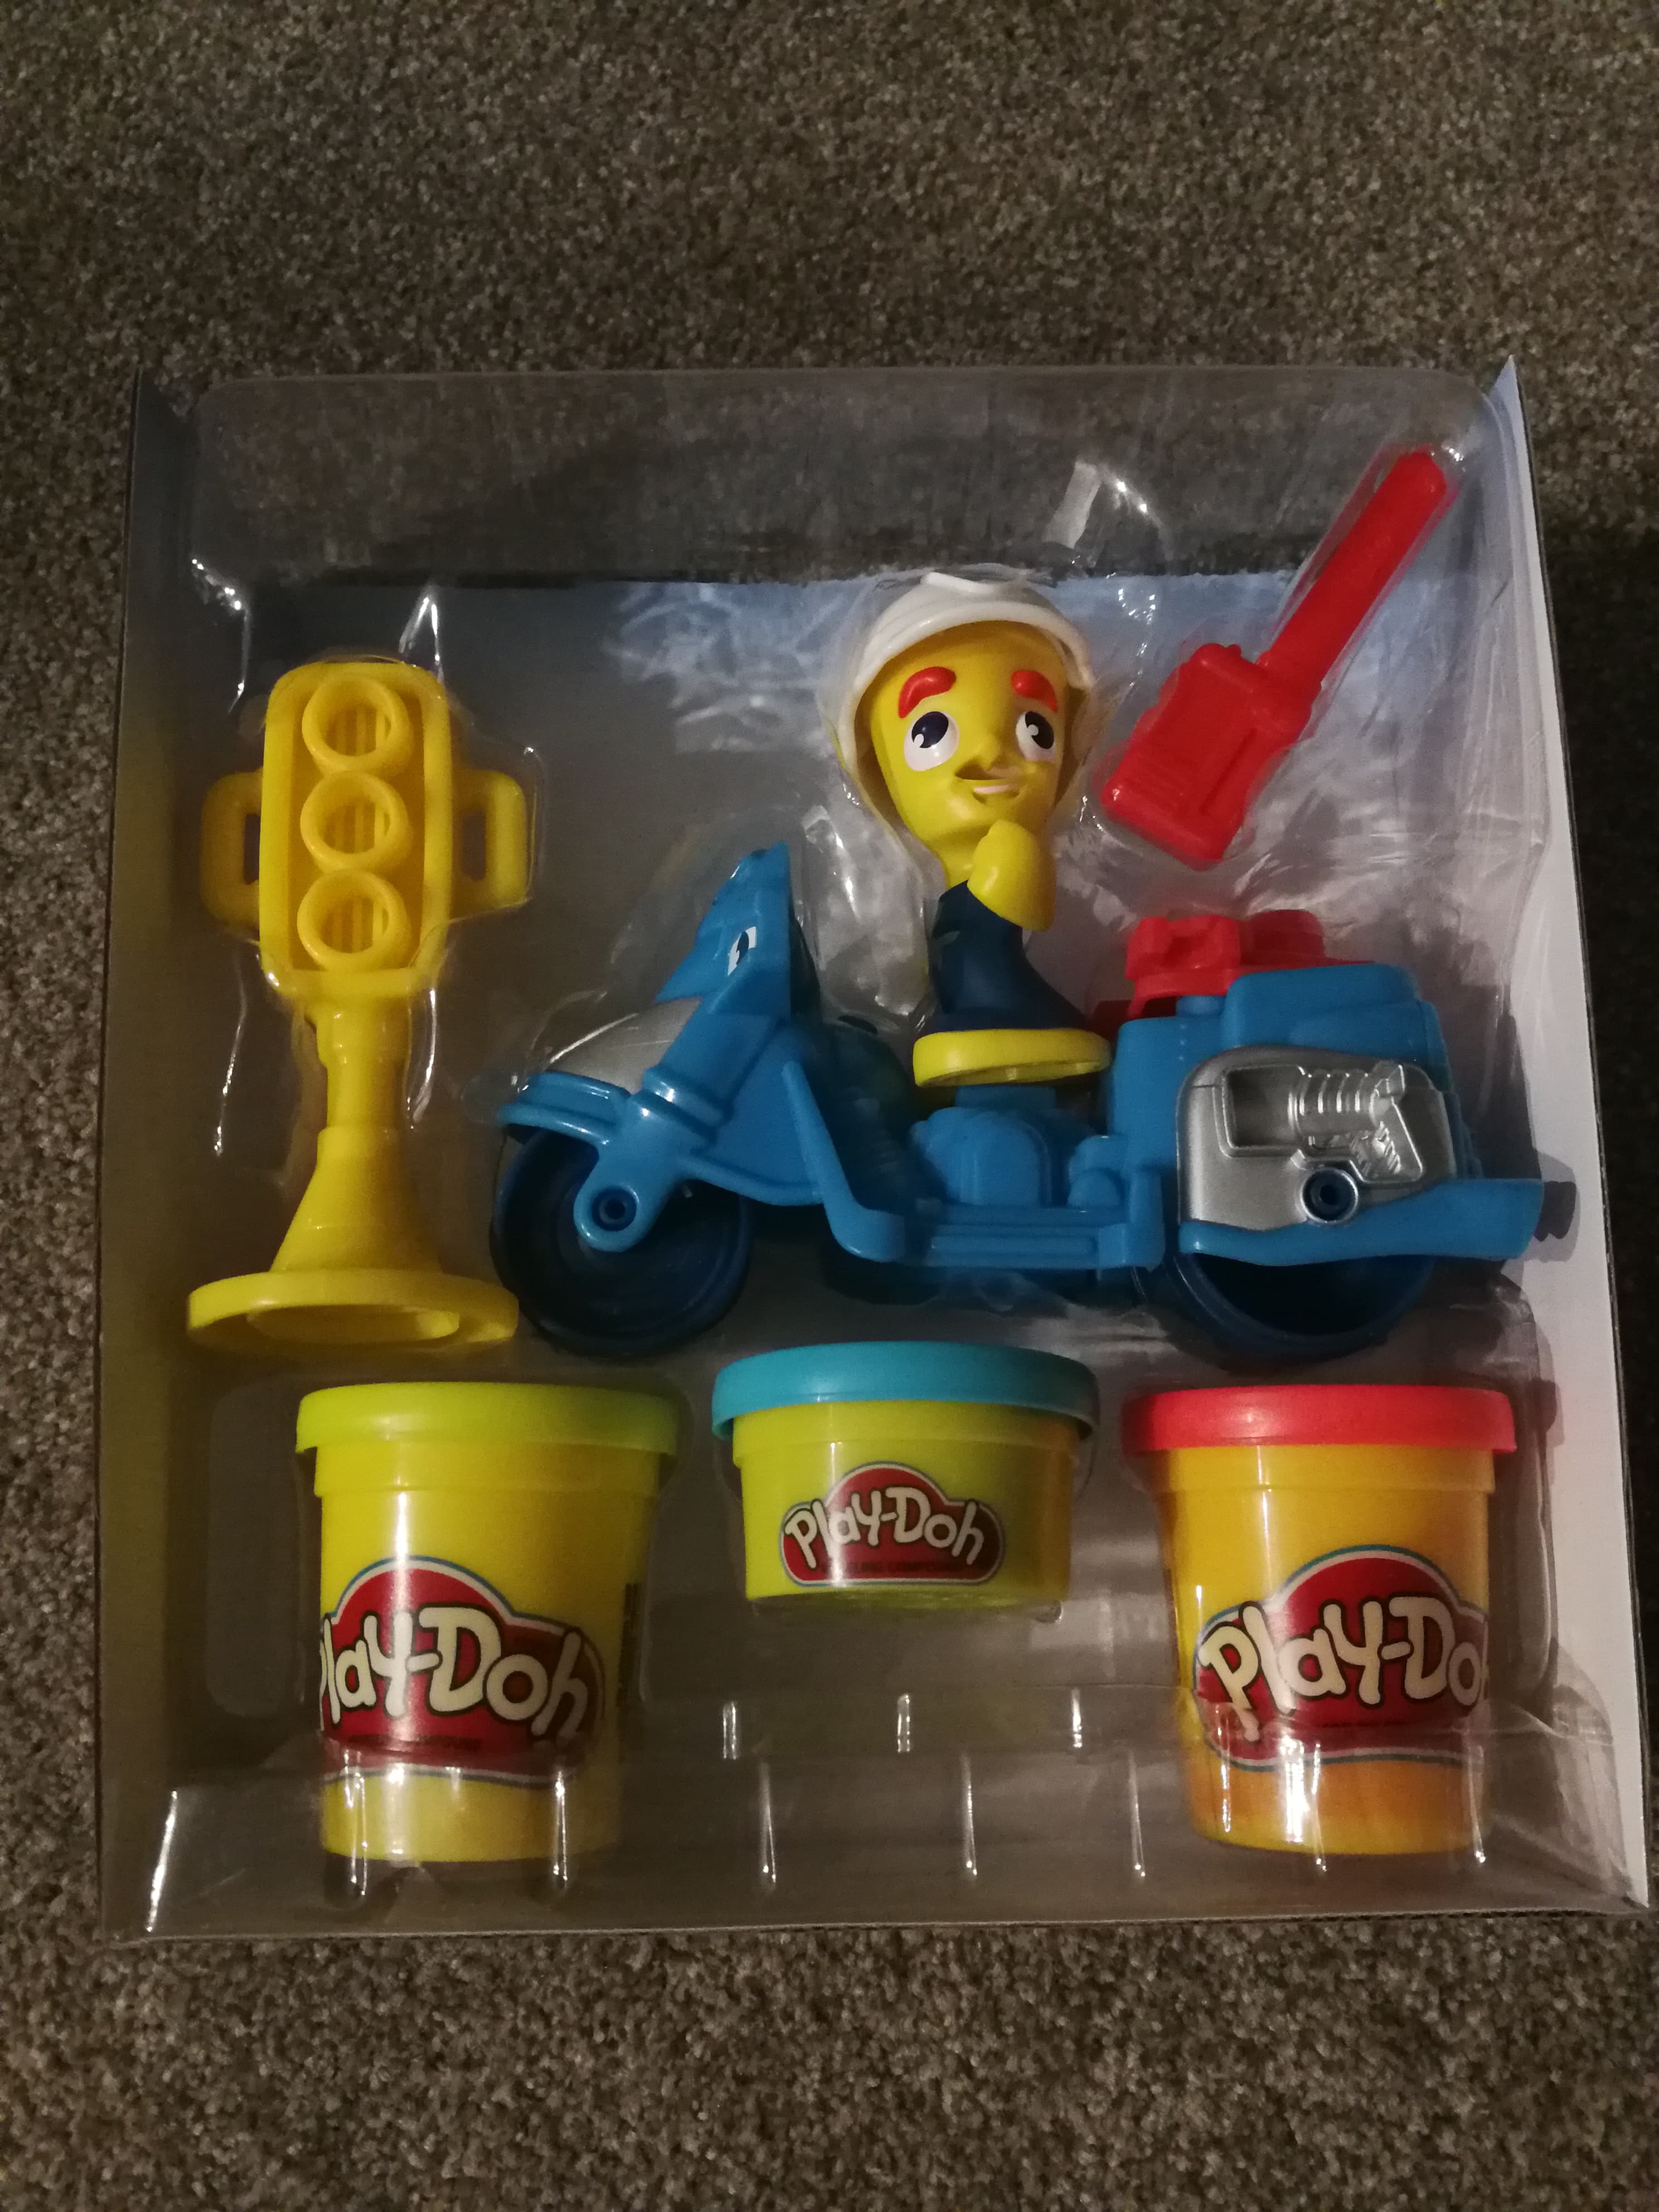 play doh town police motorcycle